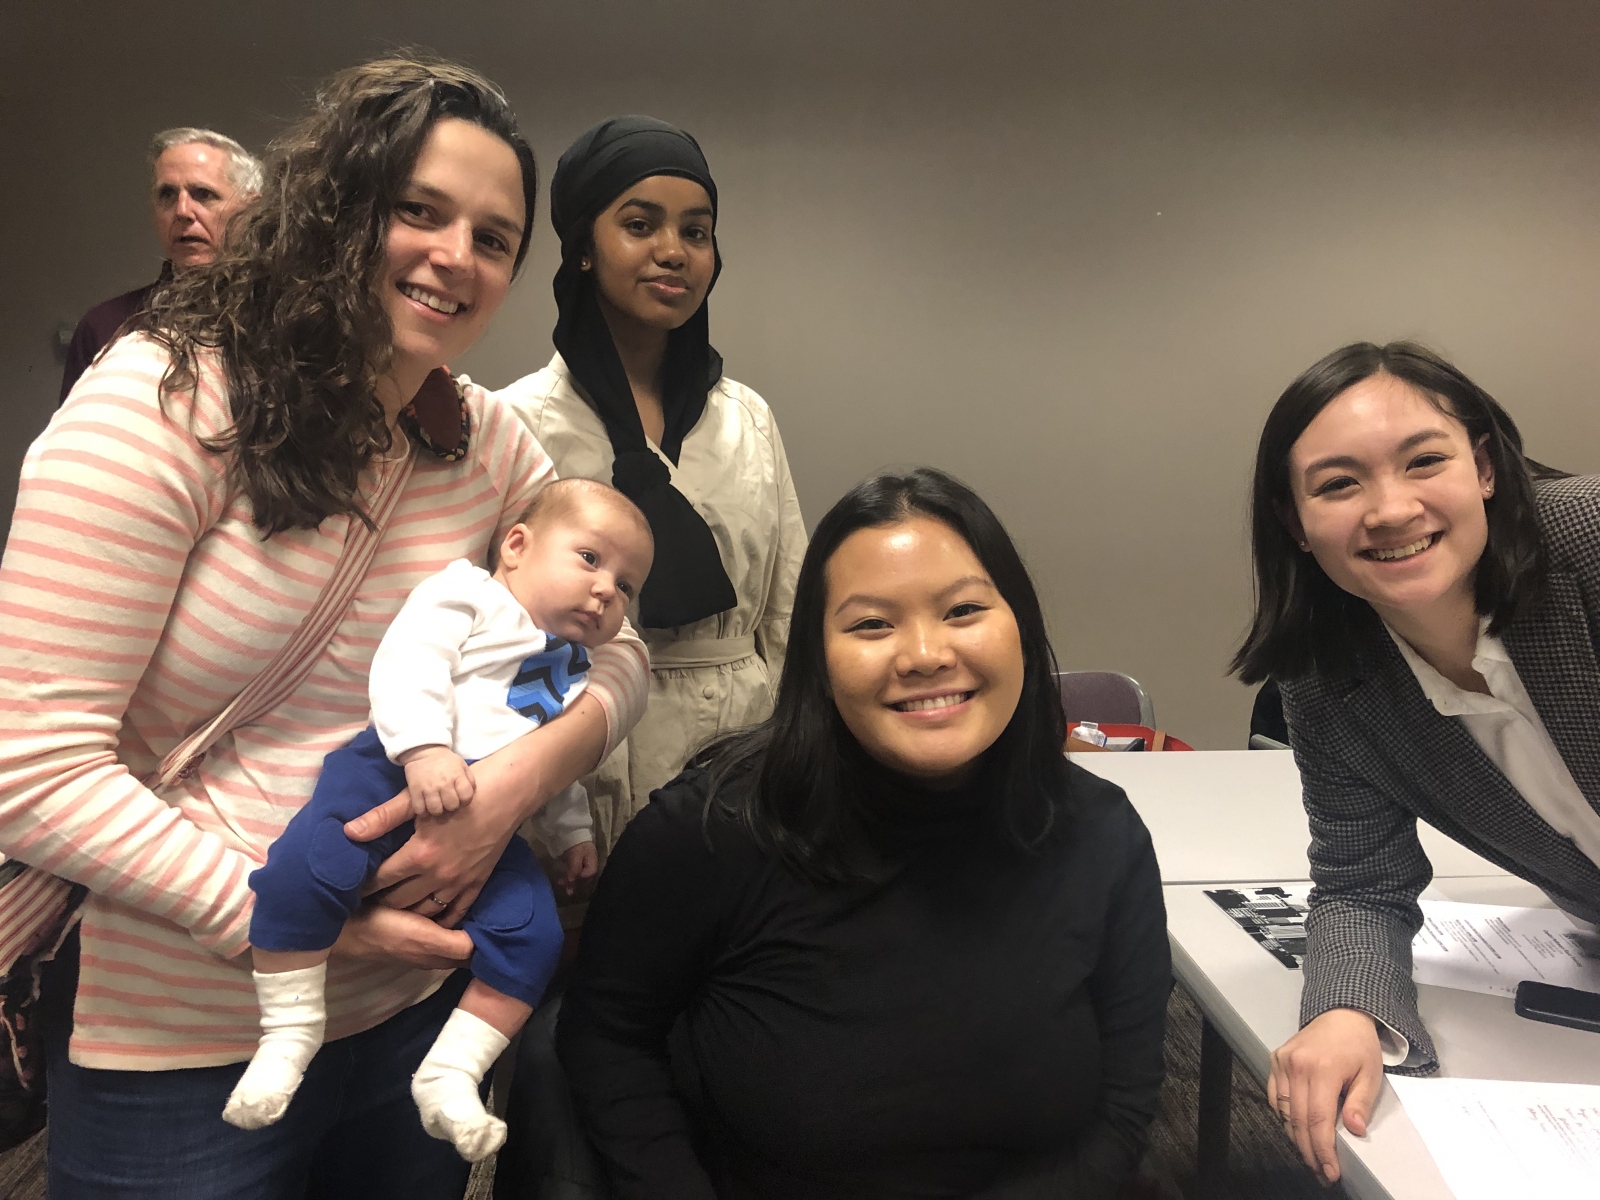 (Left to Right) Capitol Pathways supporter Annie Levenson-Falk with Capitol Pathways students Abyehn Aden, Amy Zhou, and Becca Tran.